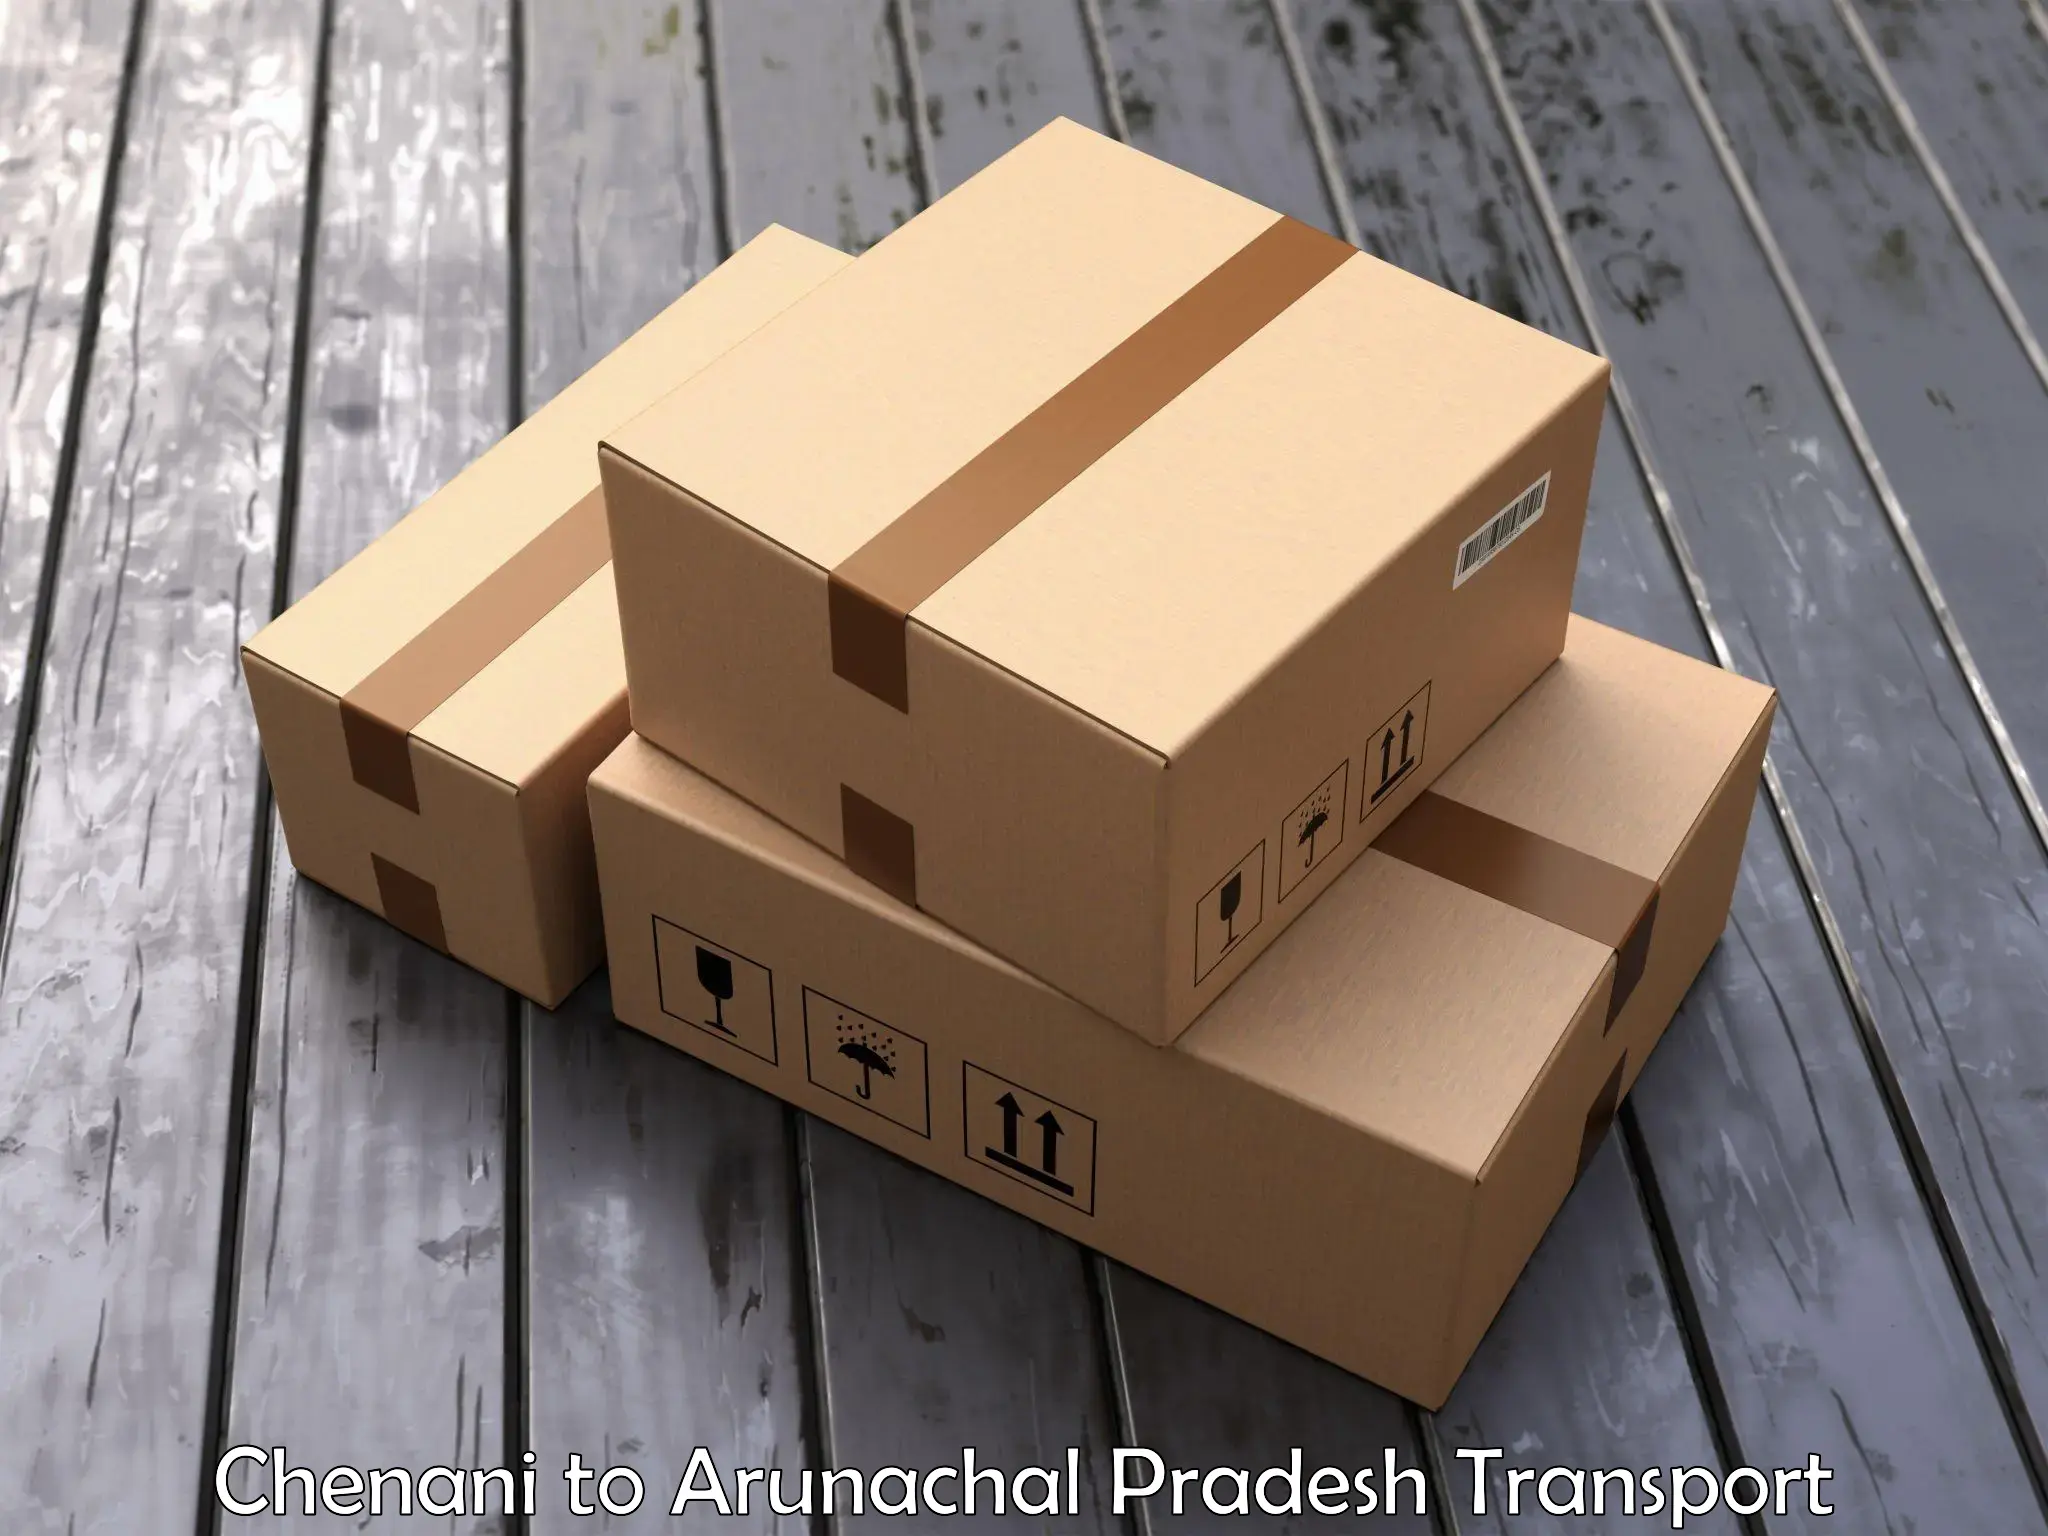 Part load transport service in India Chenani to Itanagar